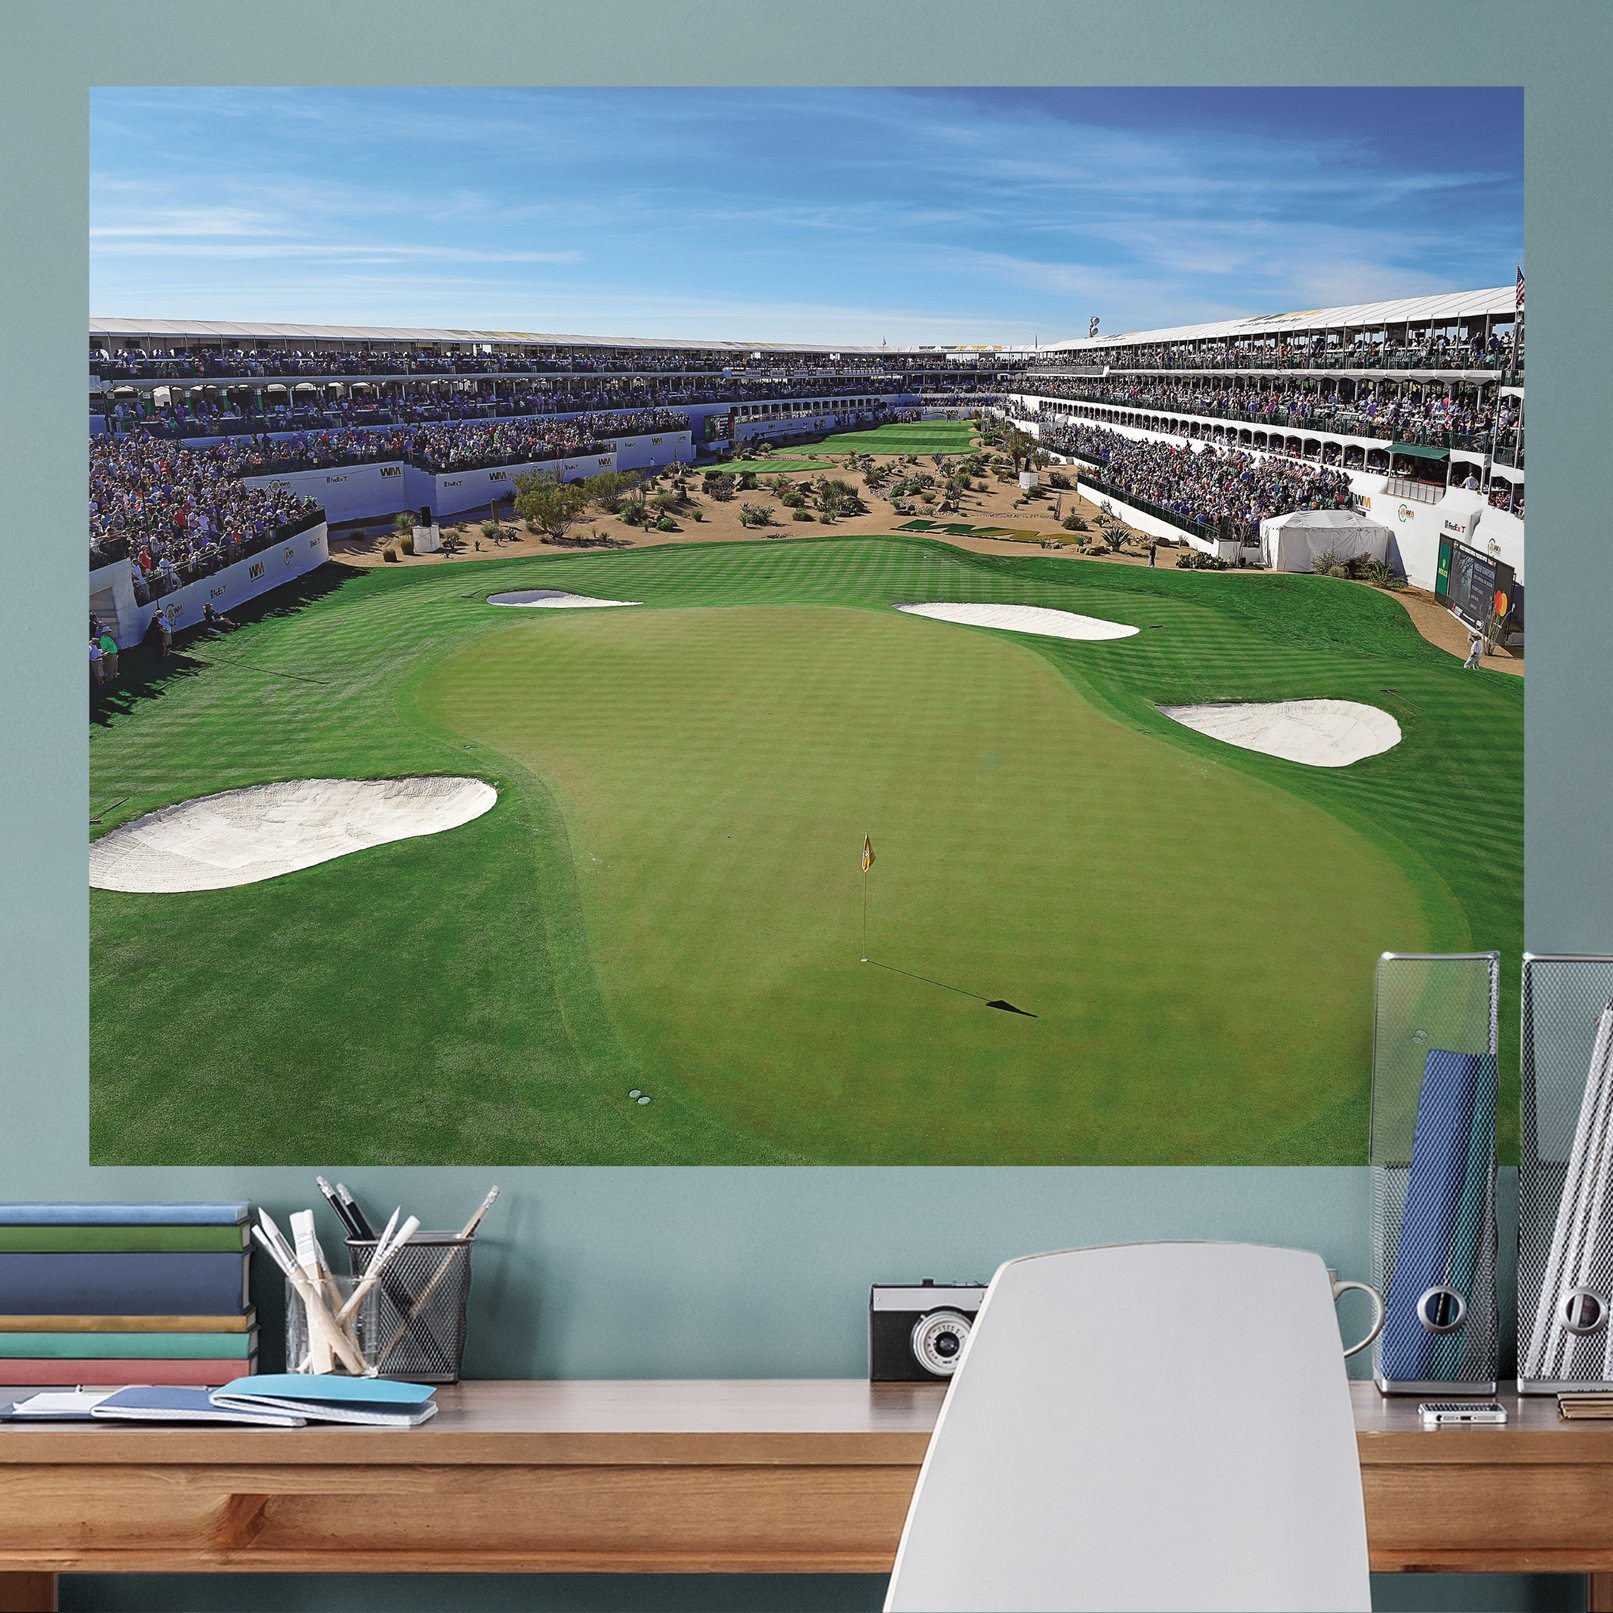 https://fathead.com/collections/golf/products/1025-00037